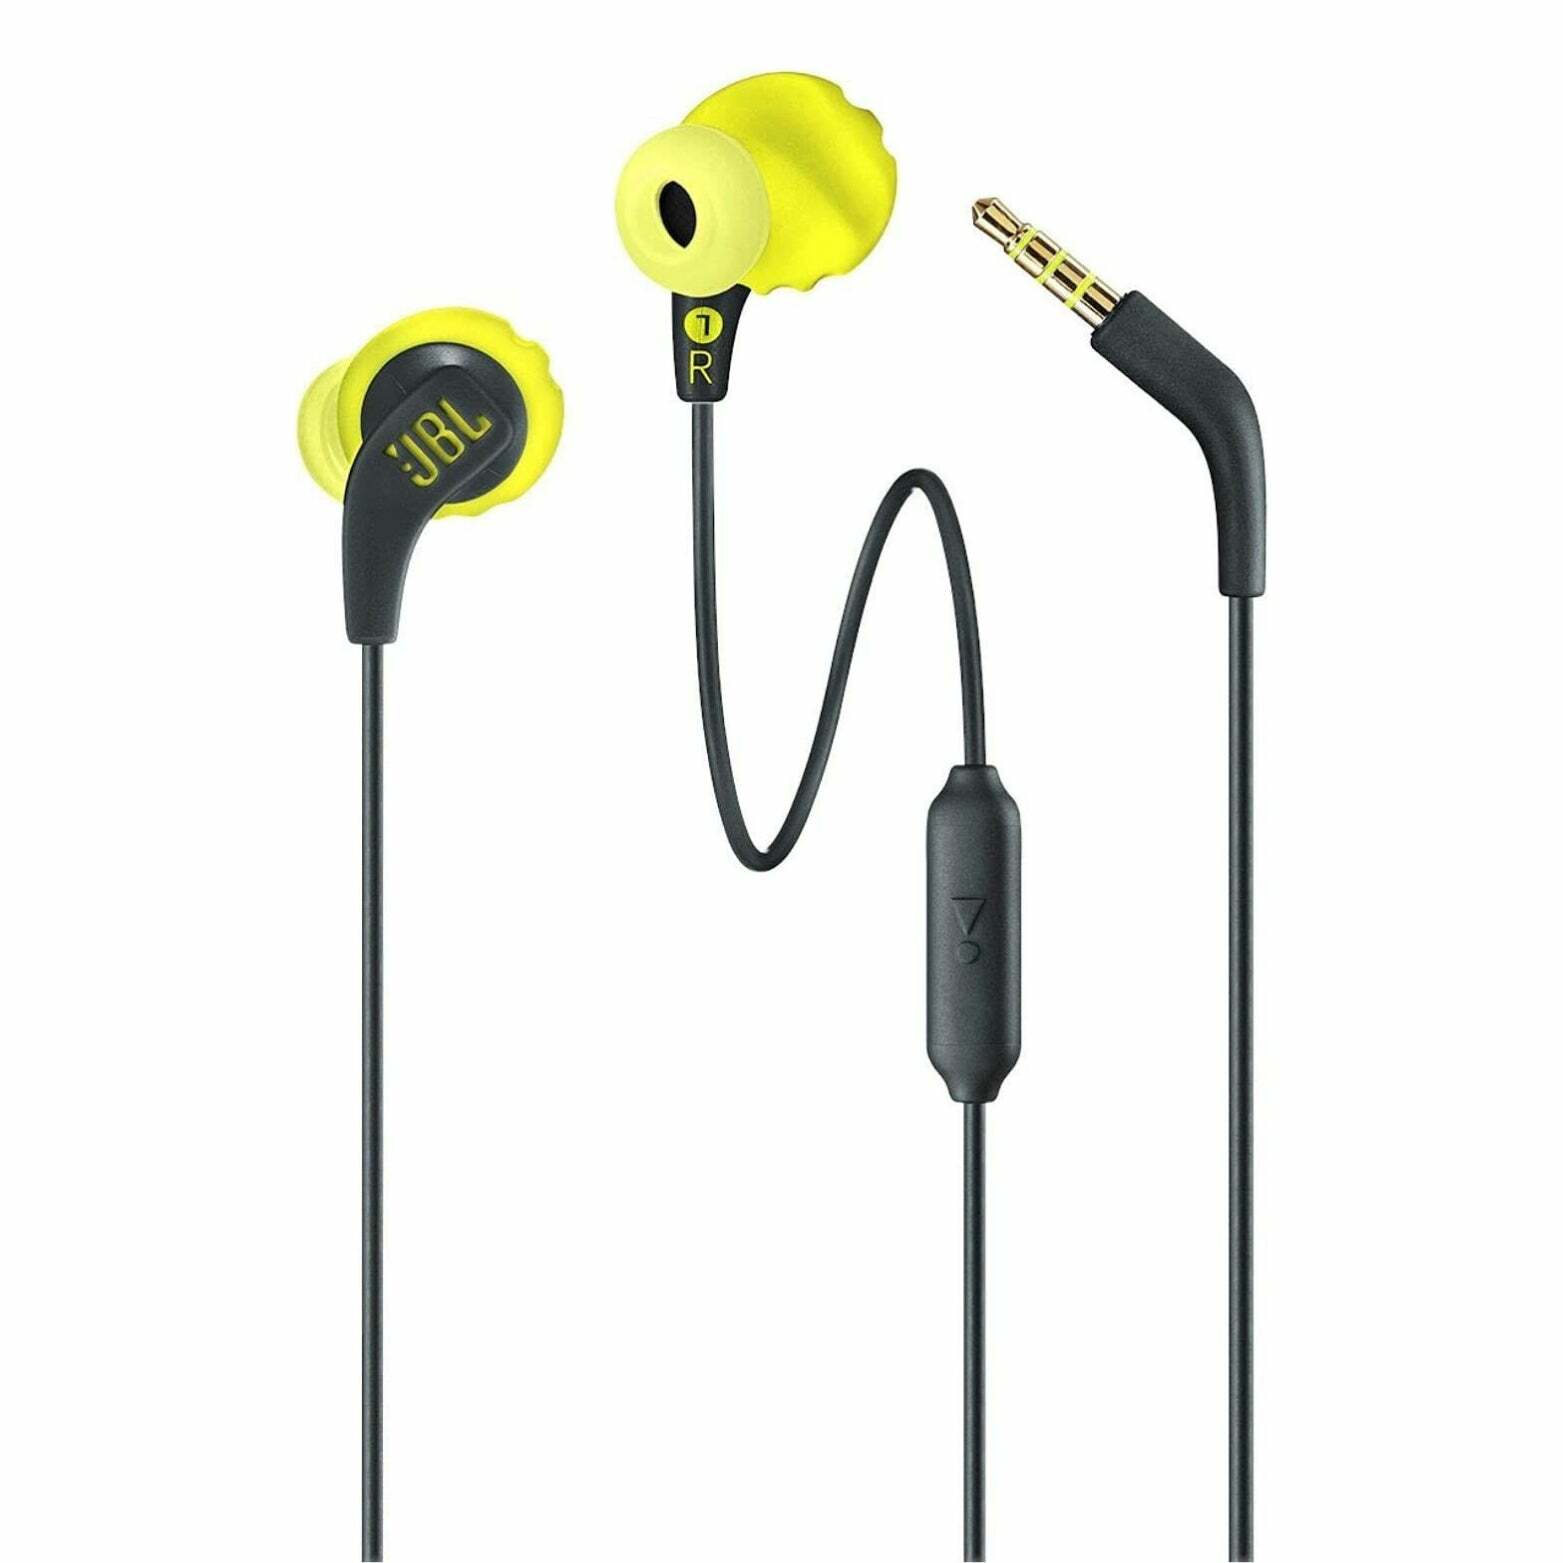 JBL Endurance Run 3.5mm Wired In-Ear Headphones Headsets with Mic